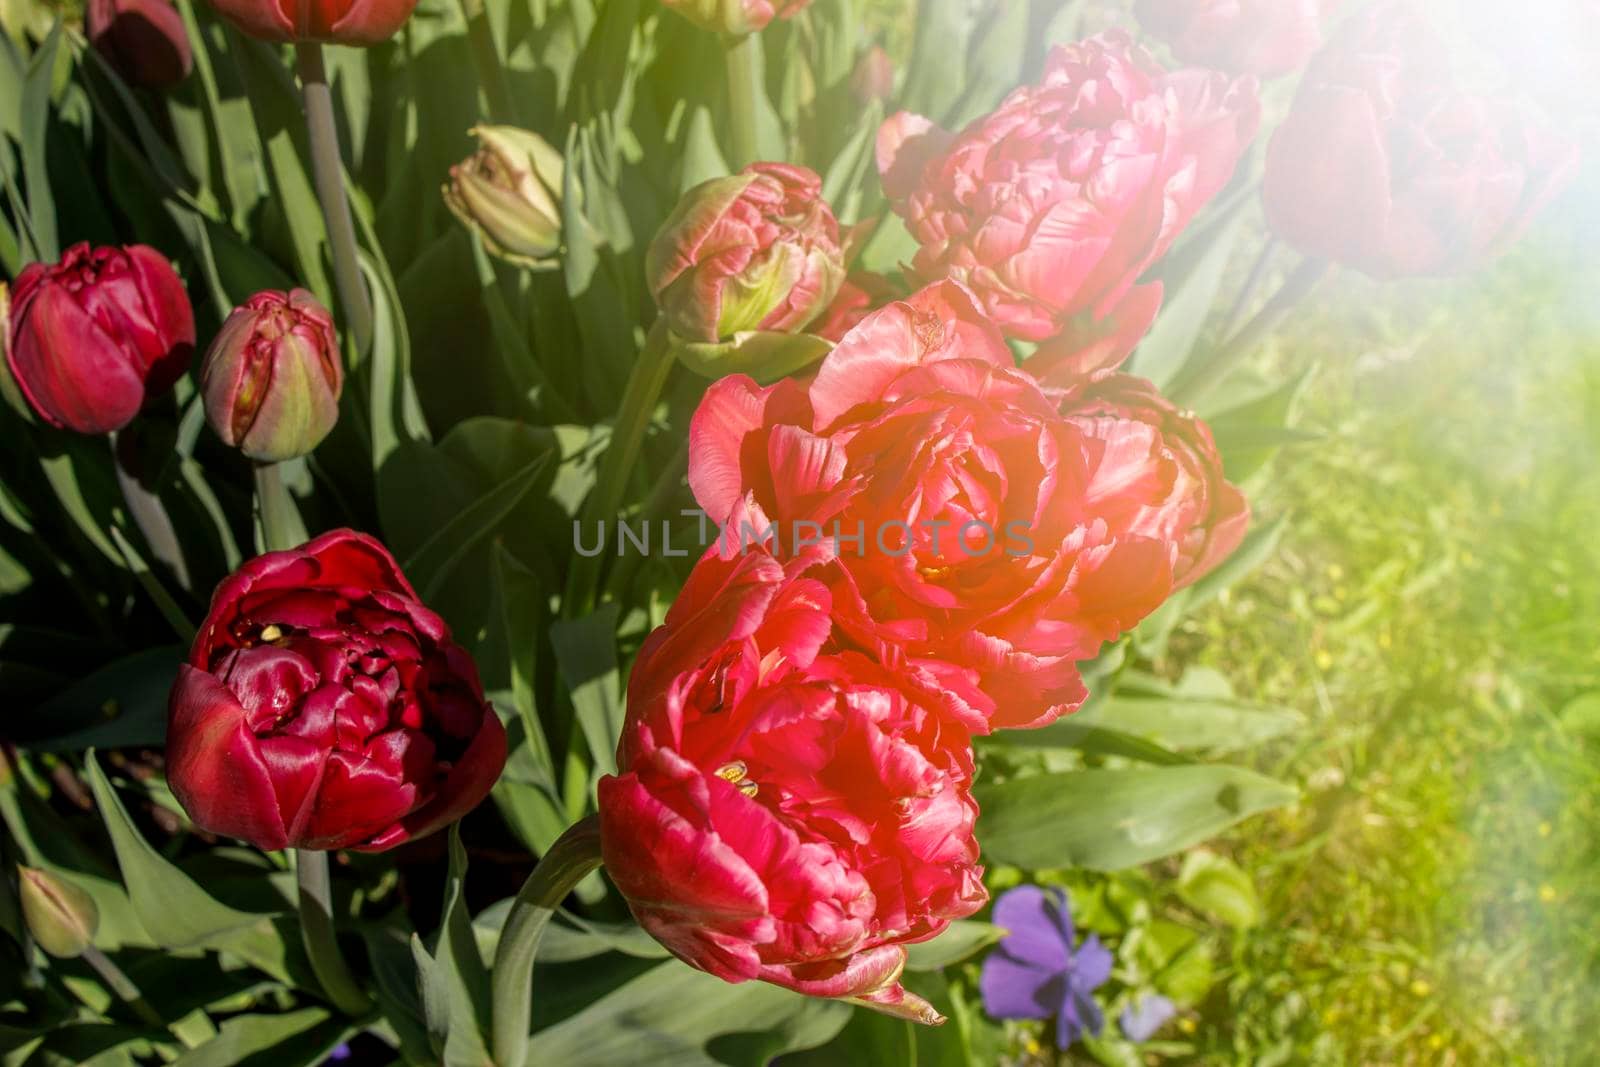 Red tulips are in the sun ligh in the spring garden near lake or pond. with falling petals by elenarostunova